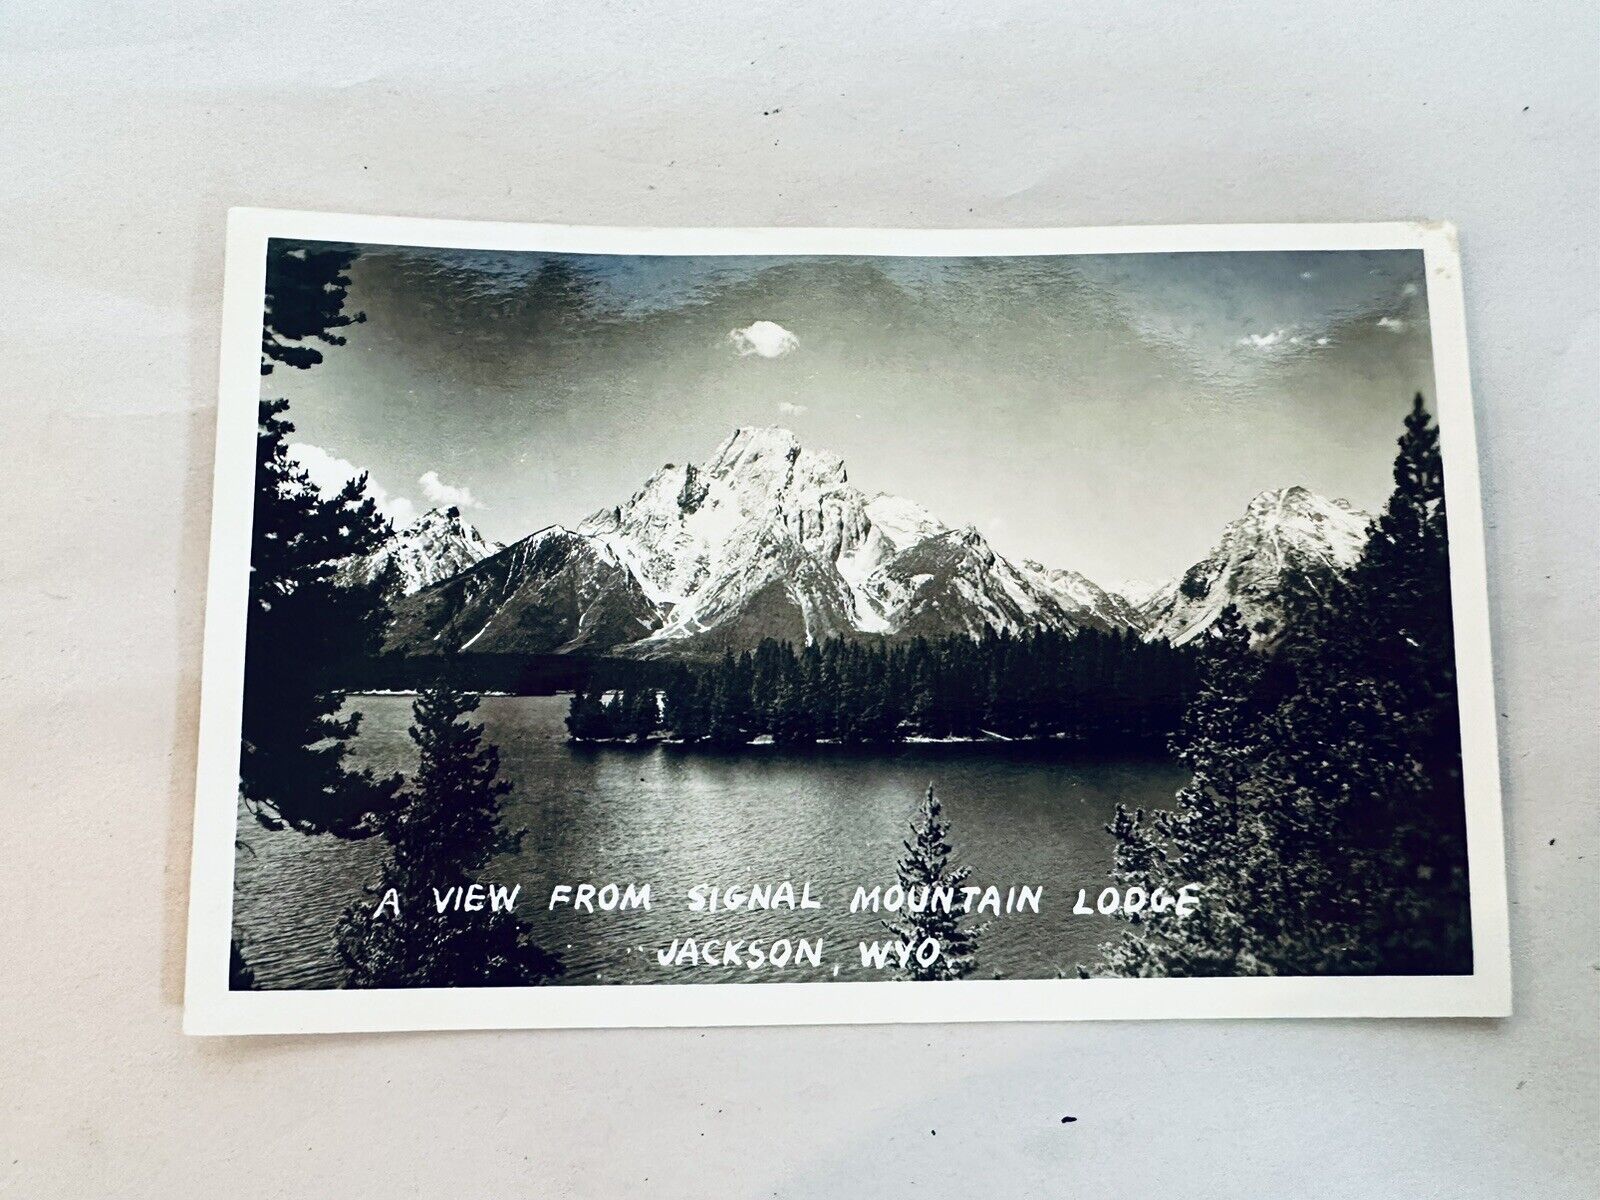 RPPC Postcard A View From Signal Mountain Lodge Jackson, Wyoming  #338